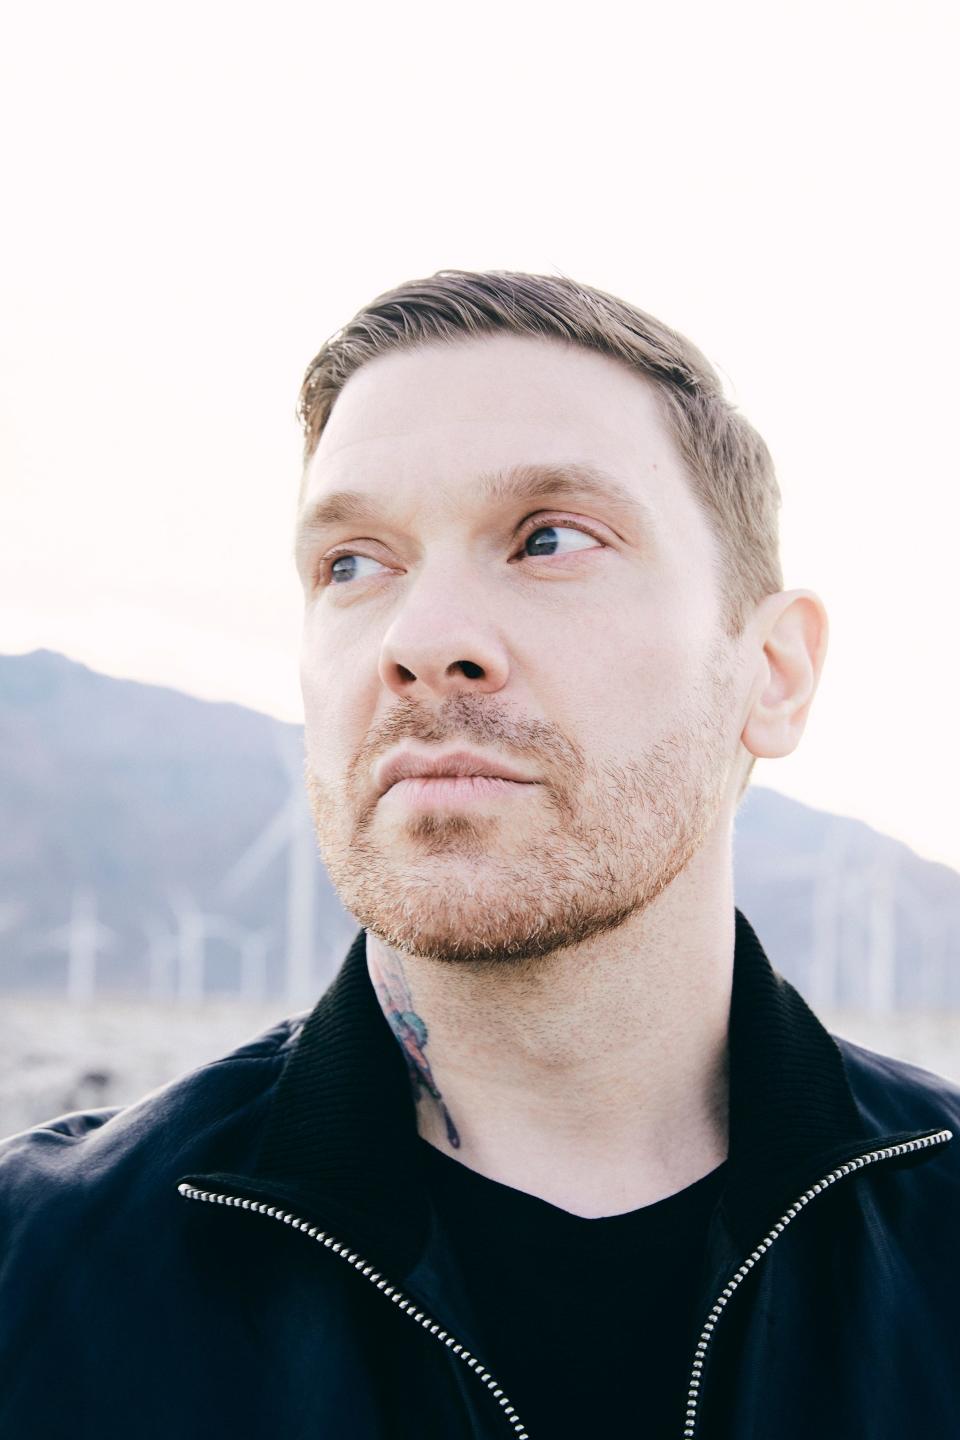 Shinedown singer Brent Smith said the closeness of the band is like a marriage.